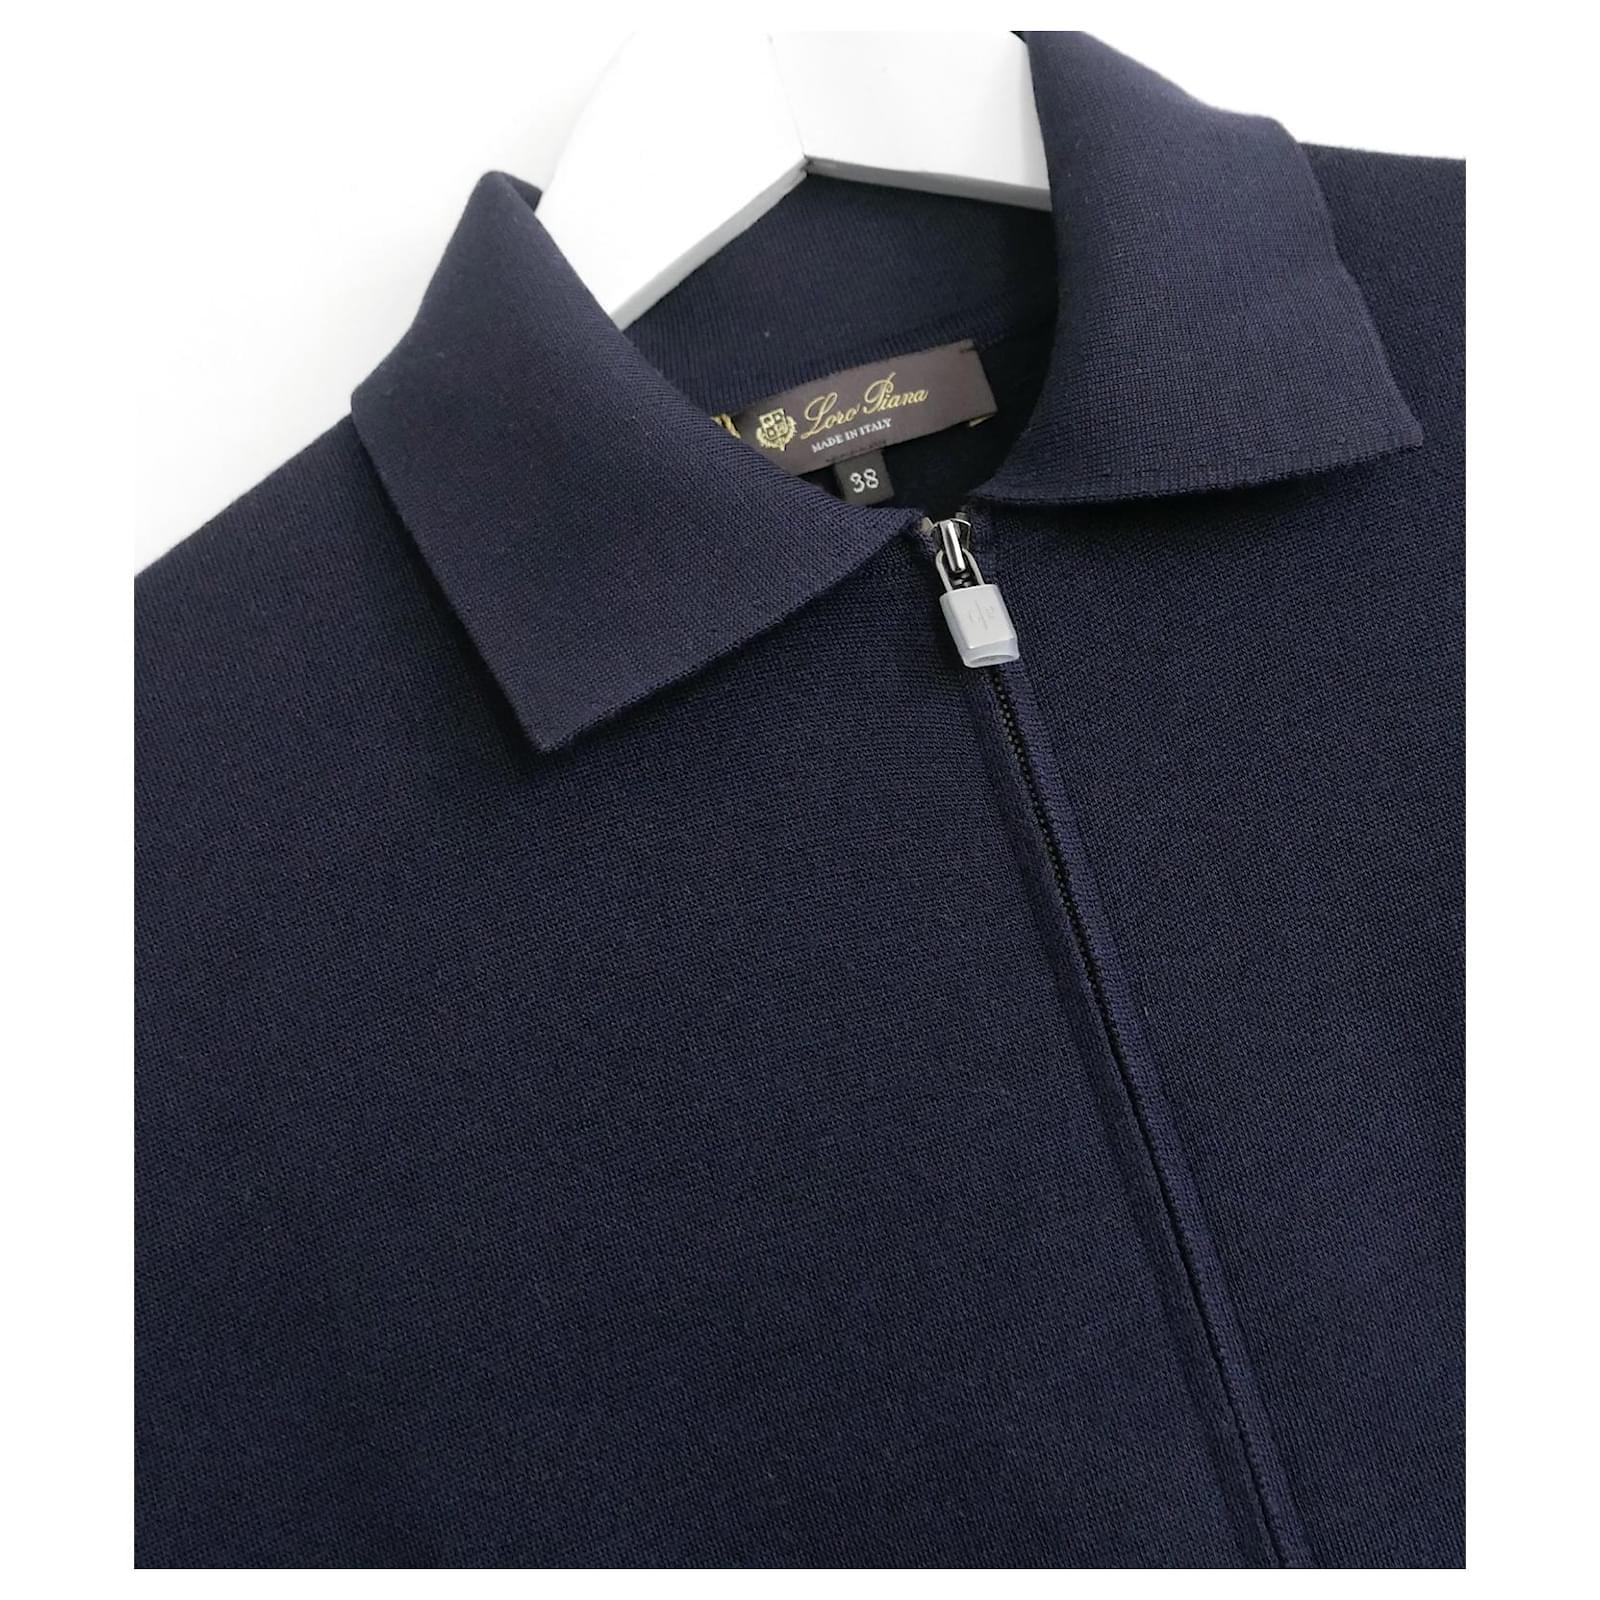 Ultra chic, quiet luxury Loro Piana Beau Rivage knit bomber jacket - bought for £2250 and new with tags and proactive sleeves to the zip fobs. Made from a mid weight, smooth and dense navy silk knit with softest cashmere facing to the inside. has 2